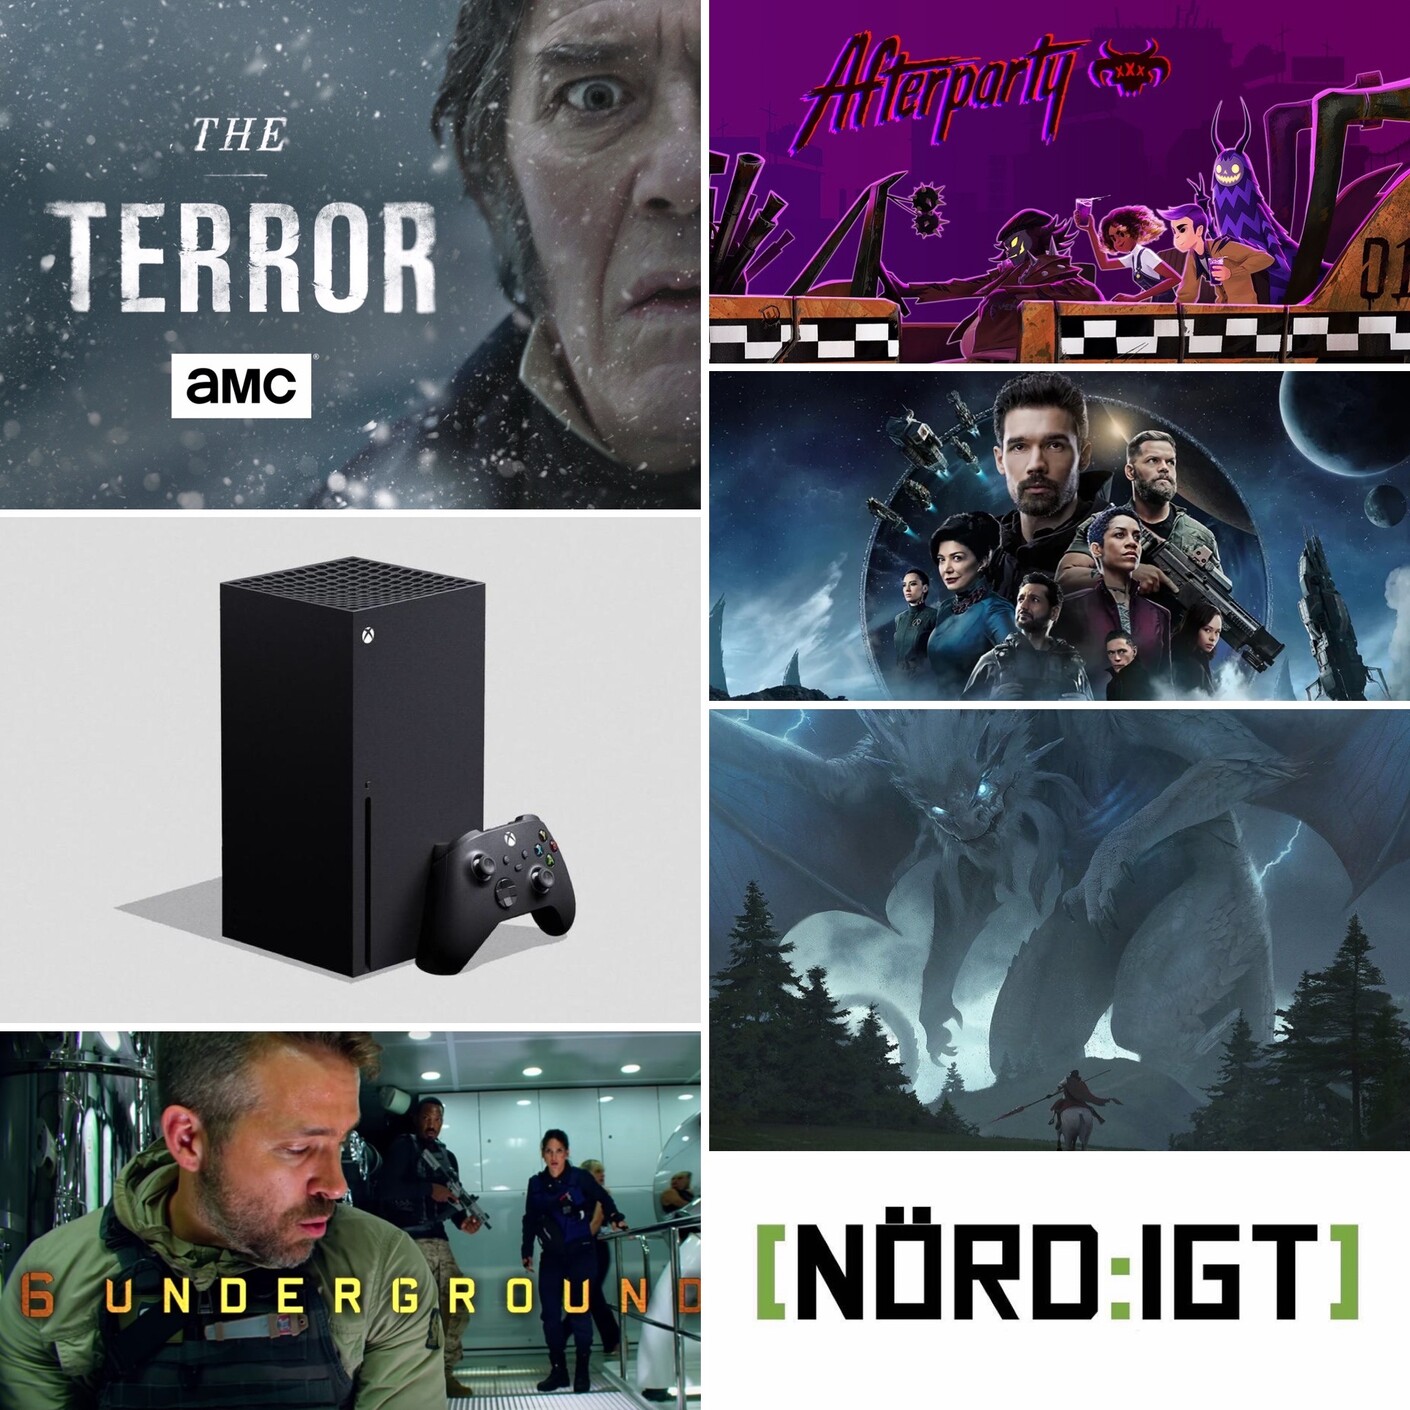 278. Den med The Terror S1, Afterparty, 6 Underground, Xbox Series X, Dragon Prince S3, The Expanse S4 och Nickleback